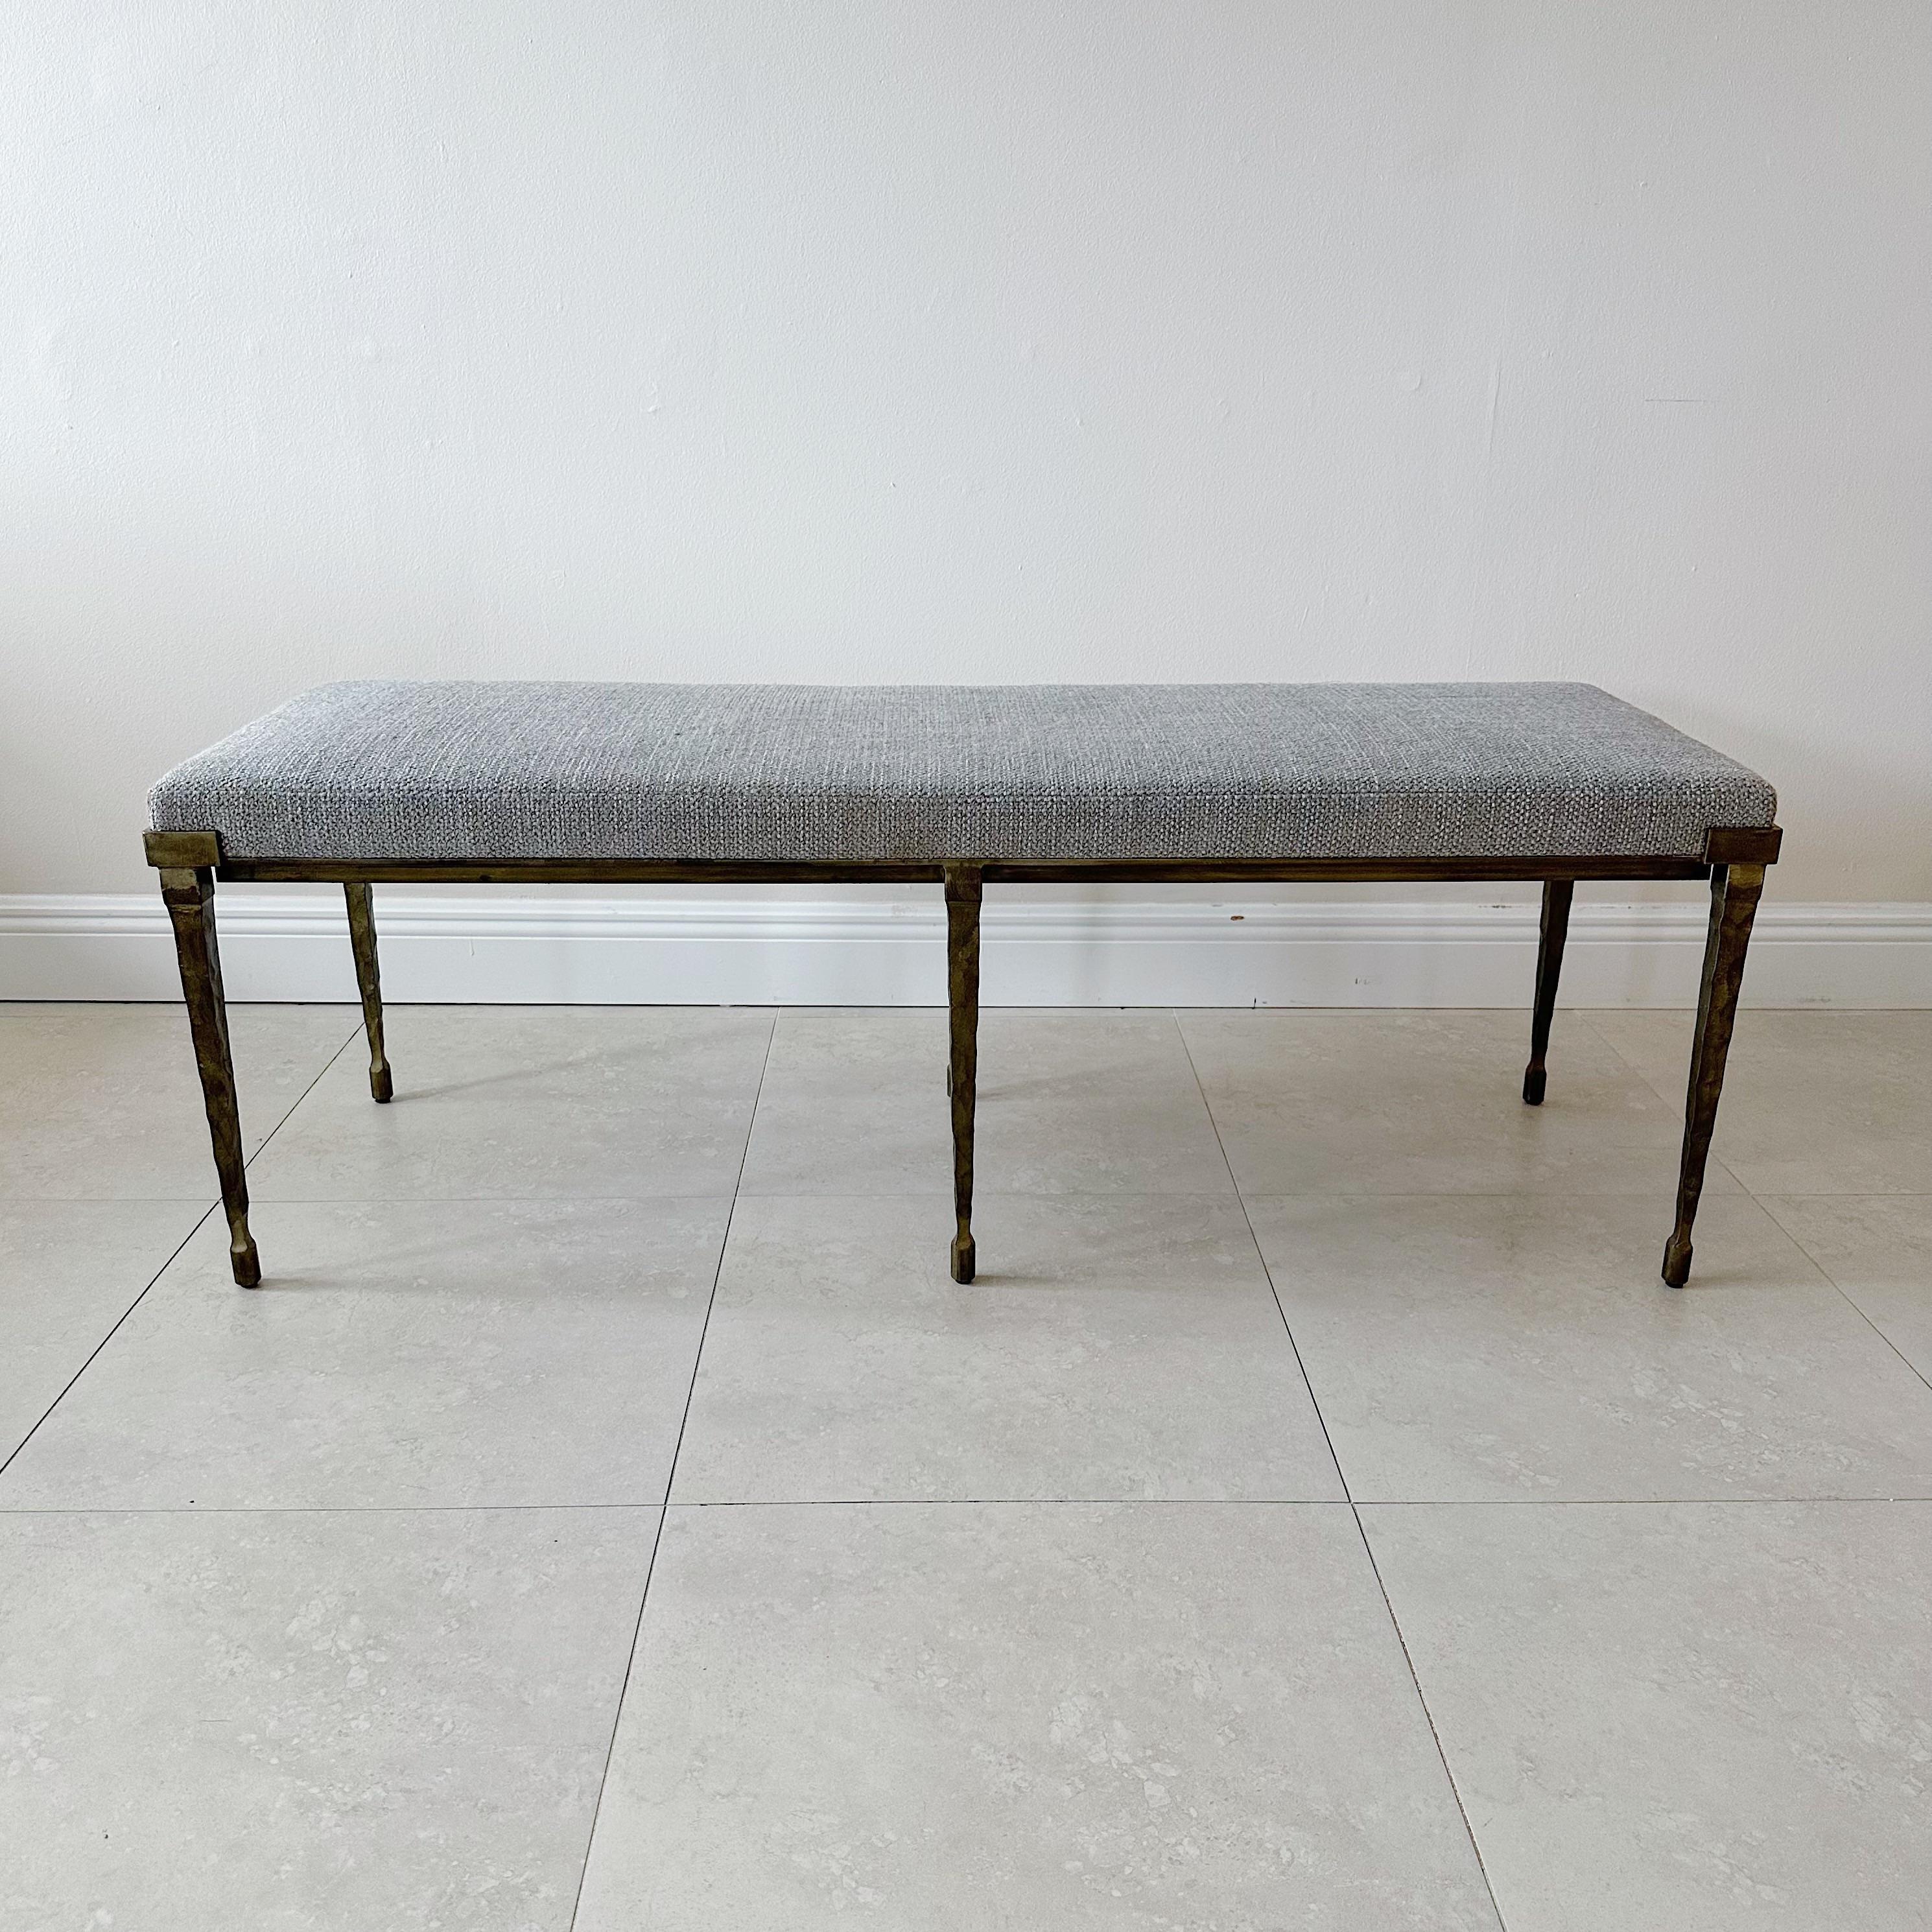 The Holly Hunt, Rue de Seine by bench takes inspiration from French mid-century neoclassicism, reimagining old-world elegance with bold, clean lines. The hand-forged iron base has a textured bronze finish that adds to its visual appeal. The bench is